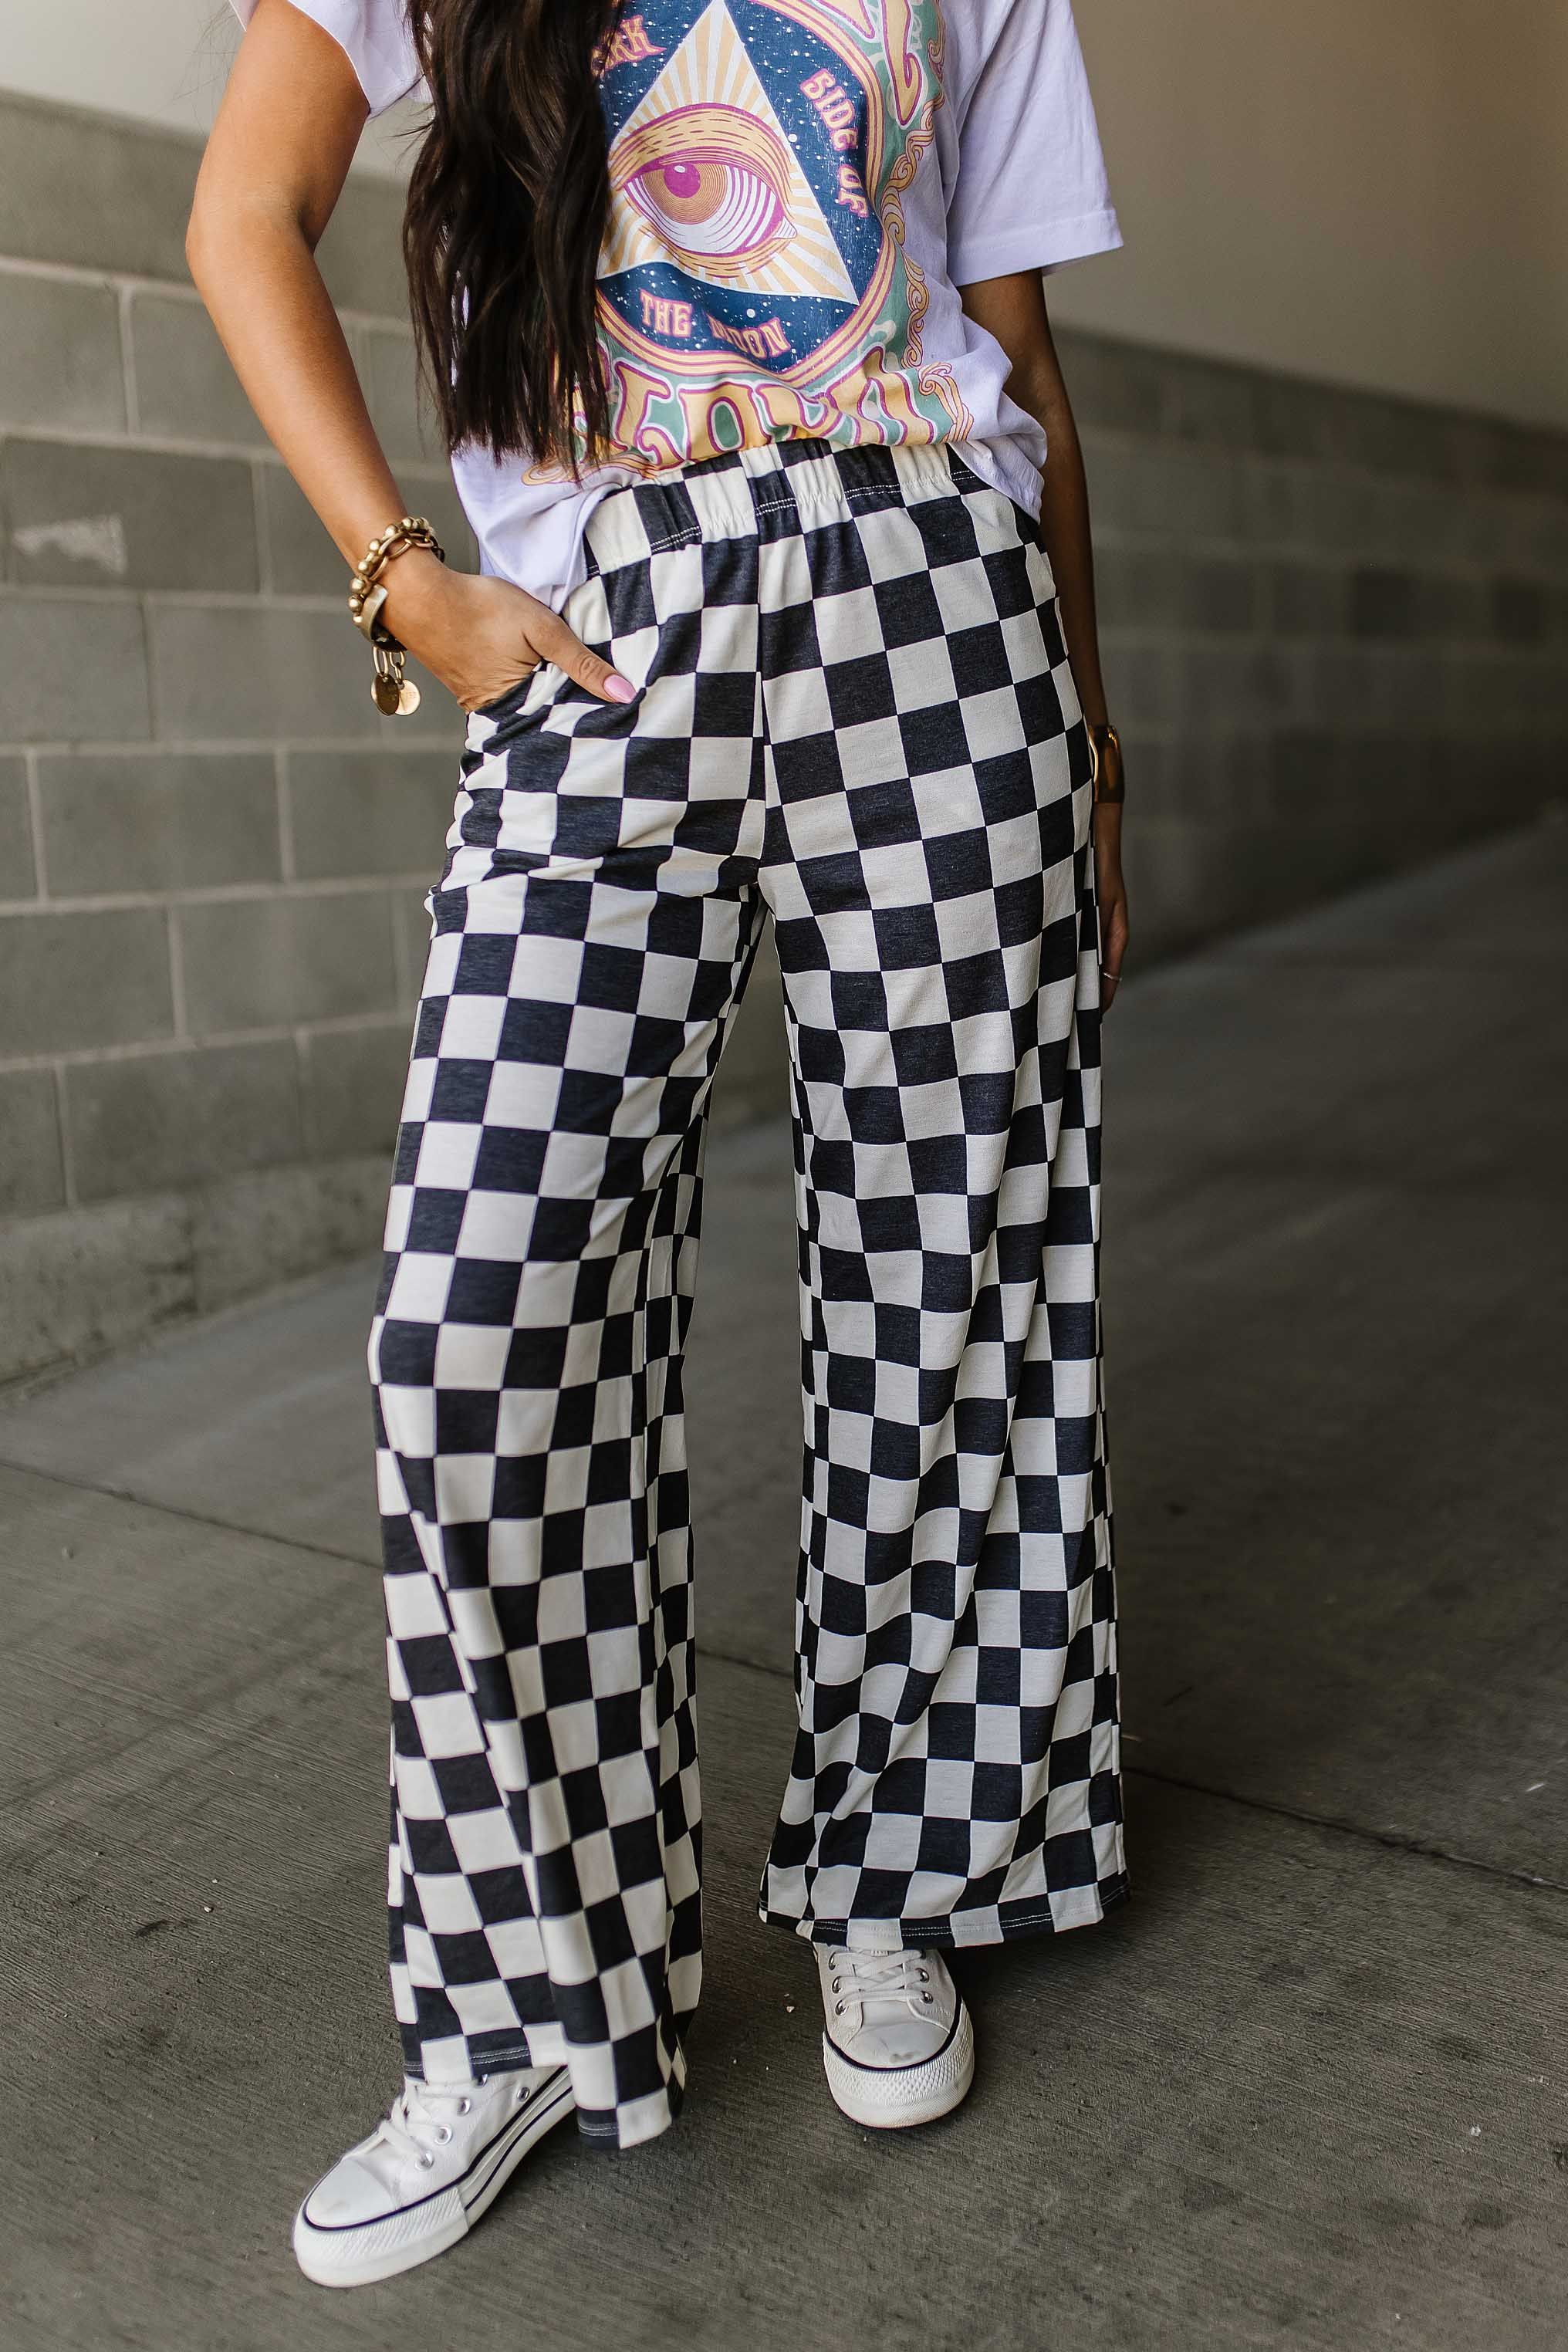 White and Navy Checked Comfy Wide Leg Pants | Checkmate Pants | Mindy Mae's Market